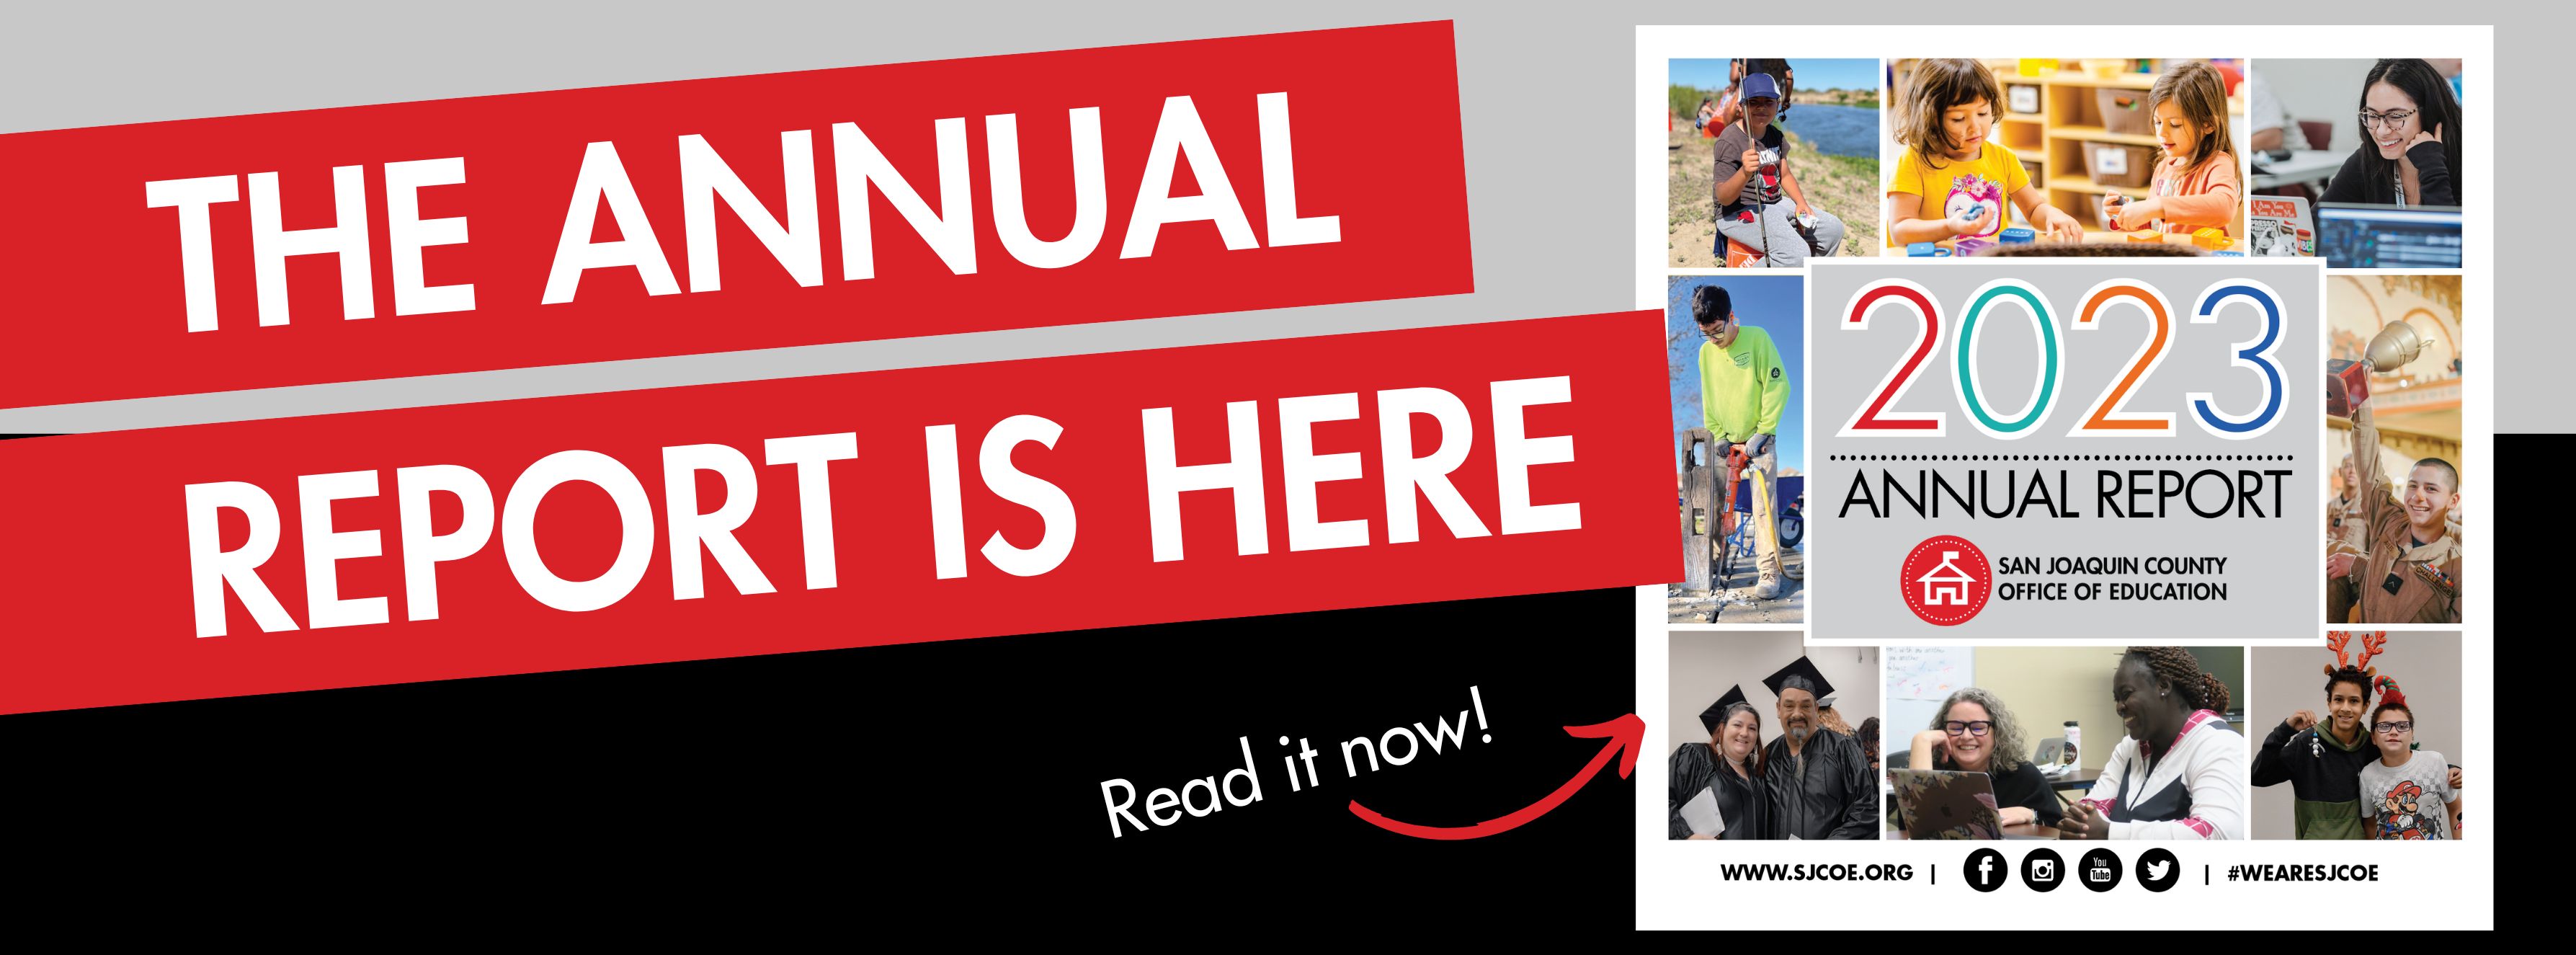 The 2023 Annual Report is here!